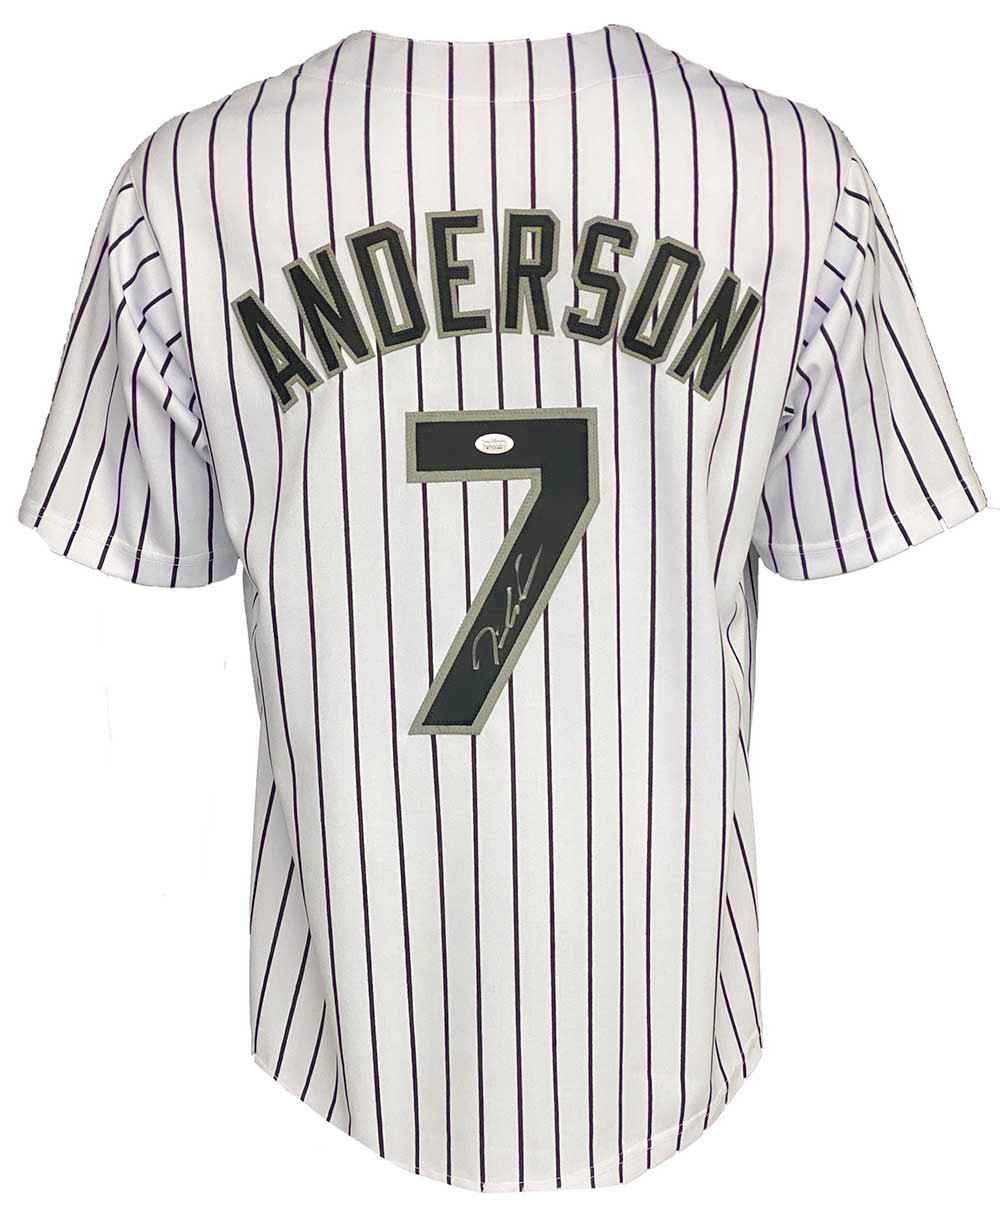 Tim Anderson 2021 Game-Used White Pinstripe Jersey